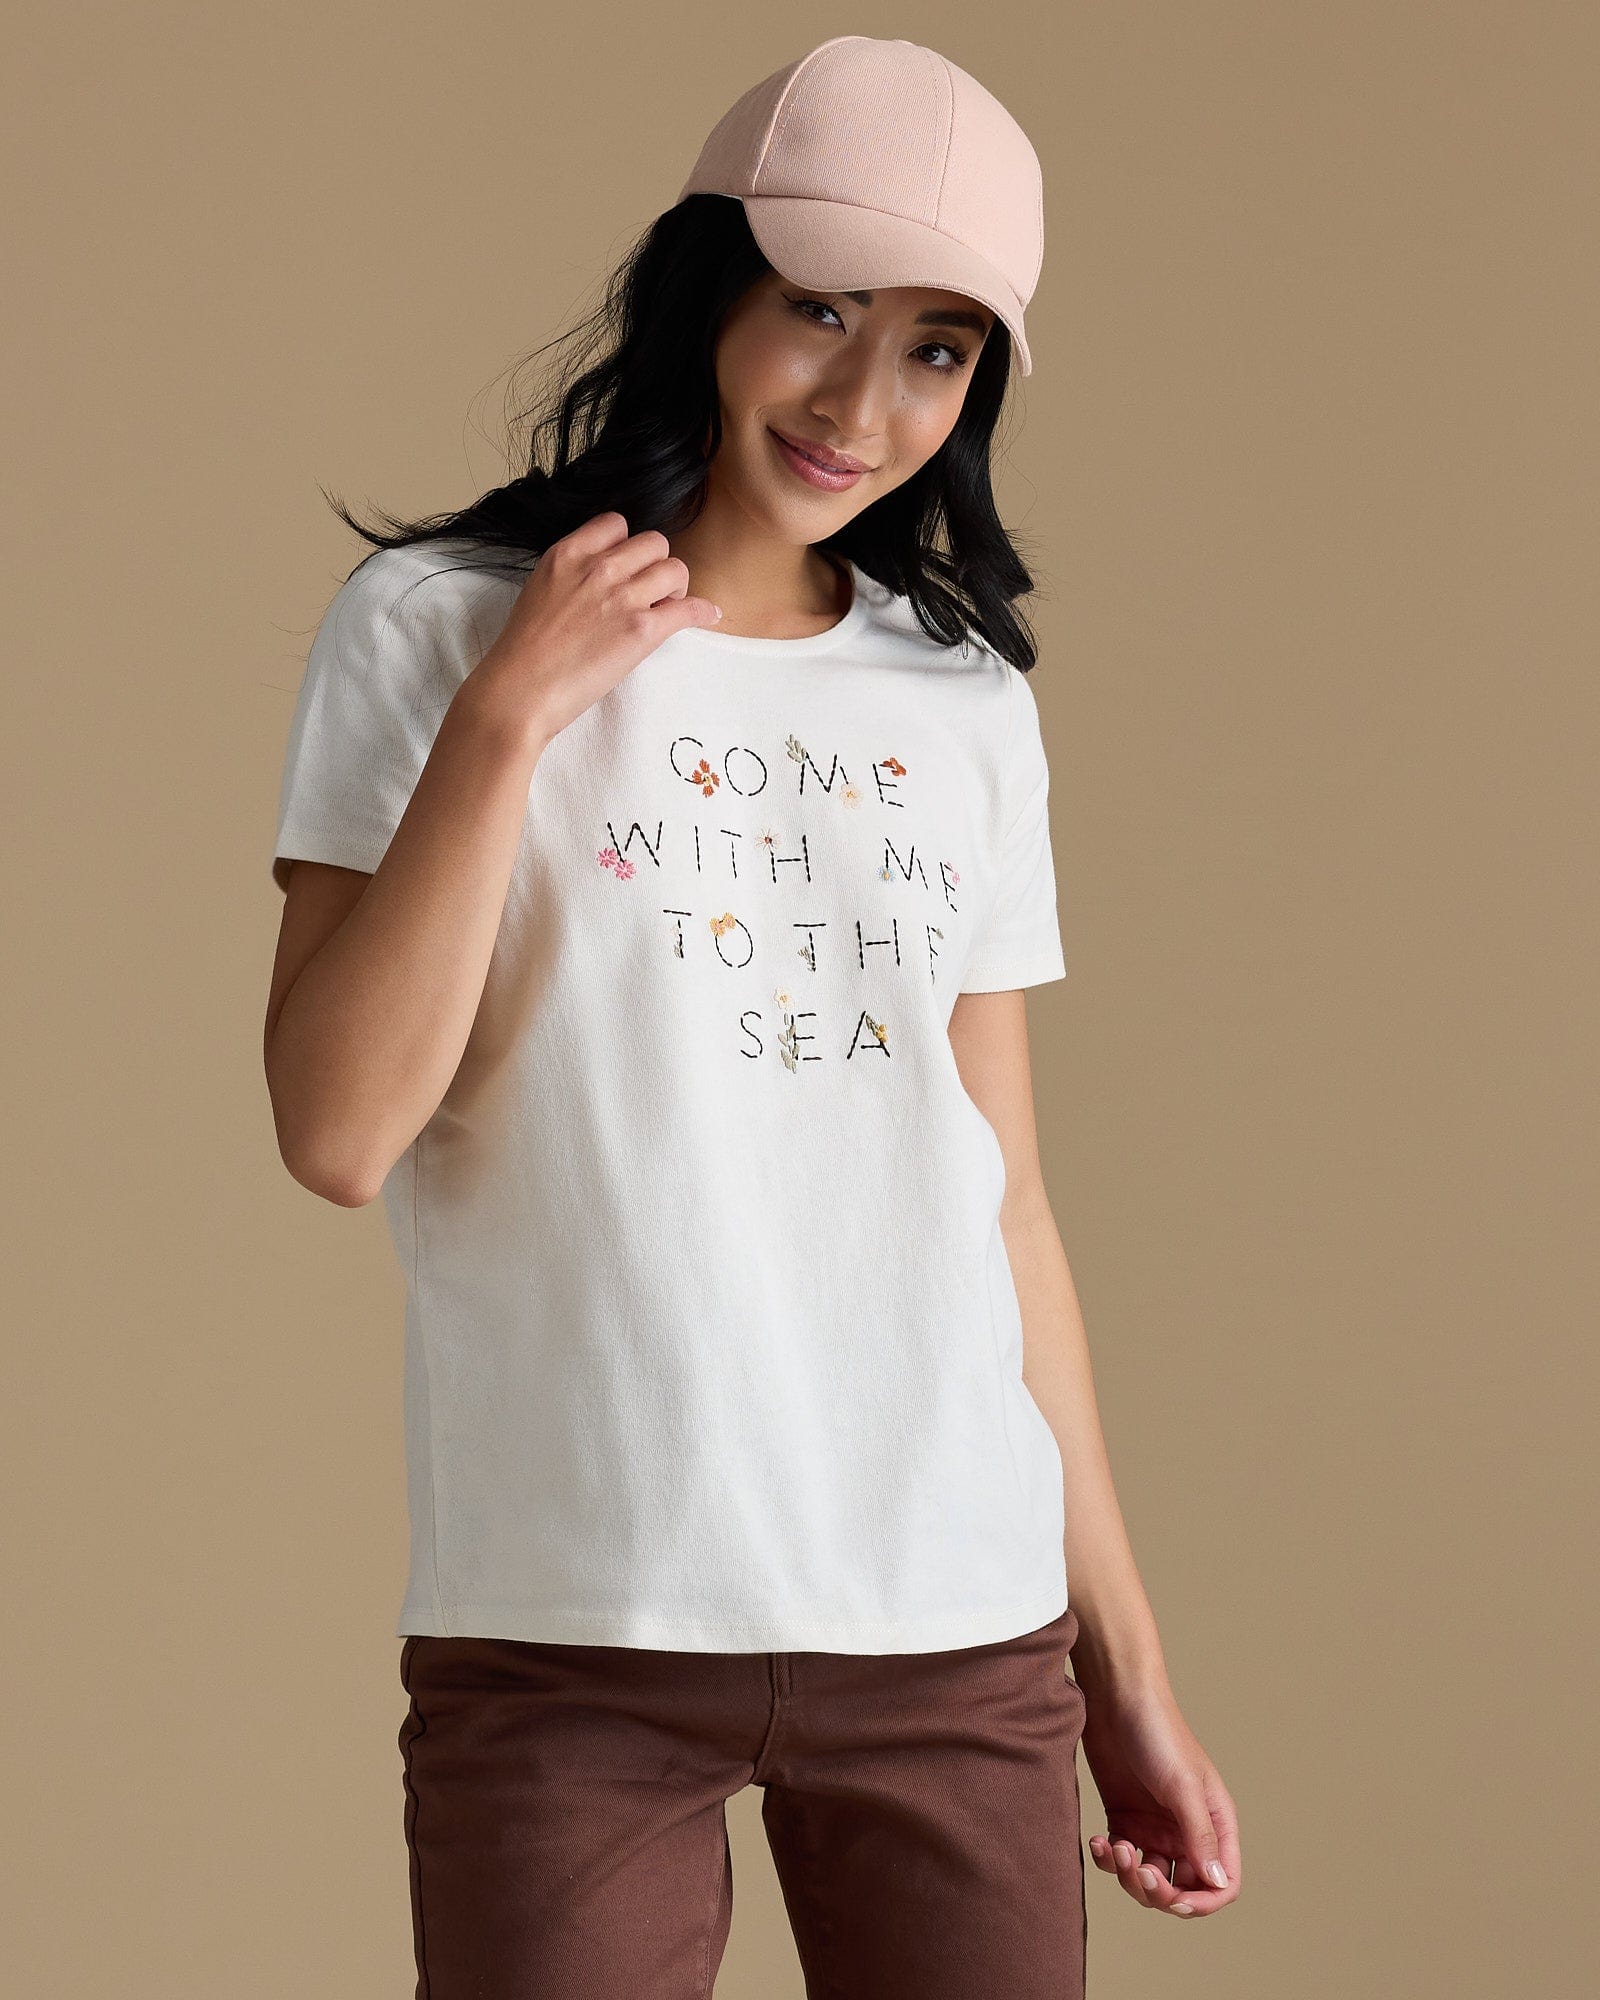 Woman in a white graphic tee that says "ccome with me to the sea"